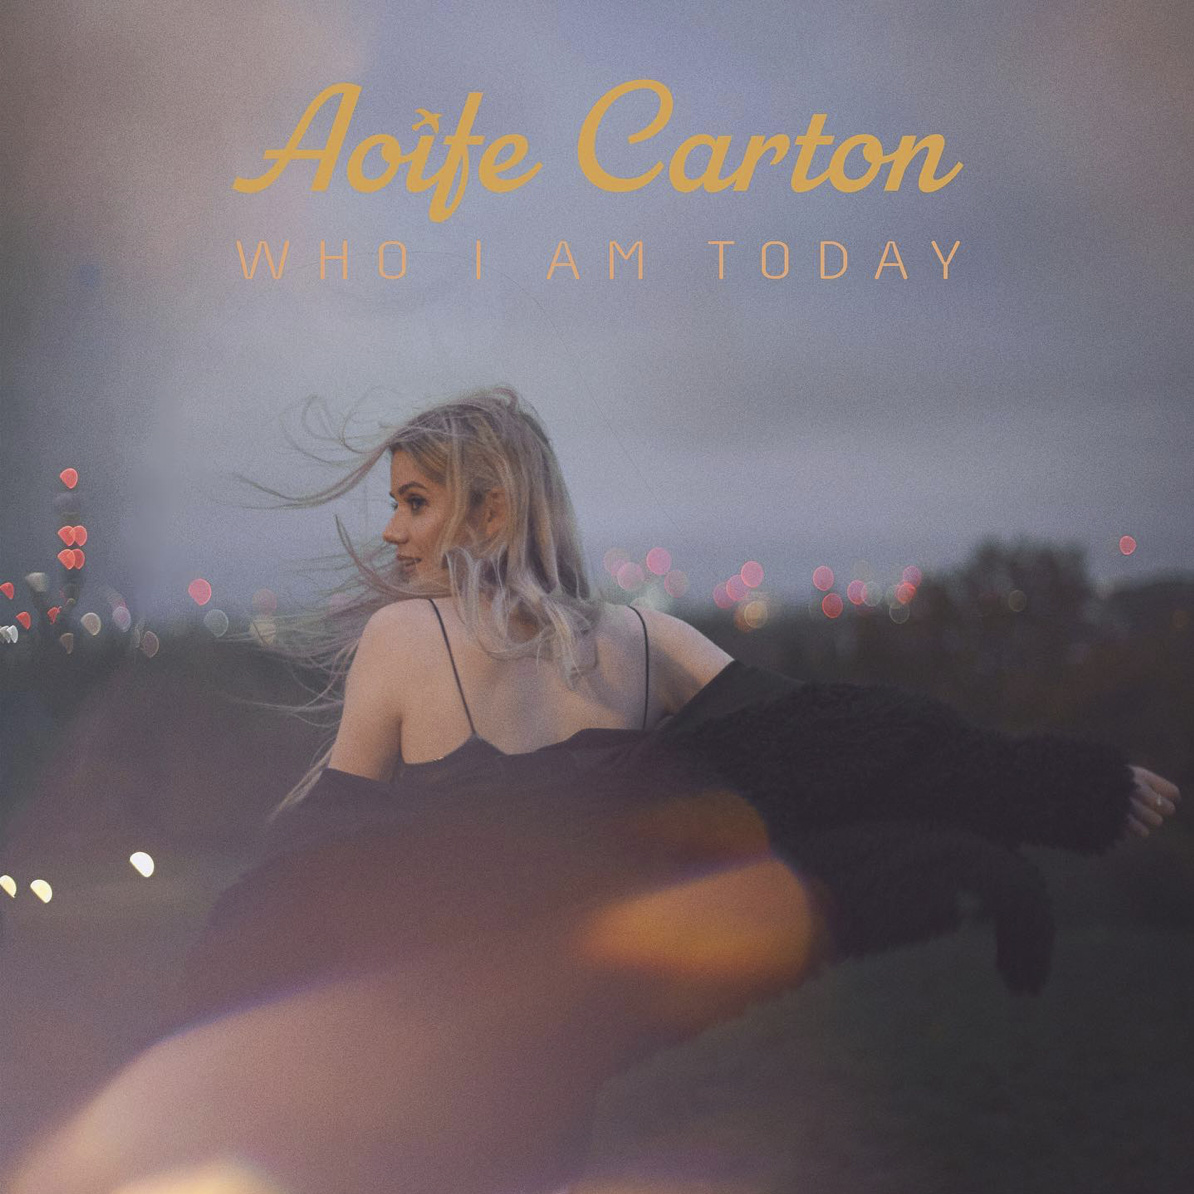 aoife carton: who i am today cover art by ruby gaunt